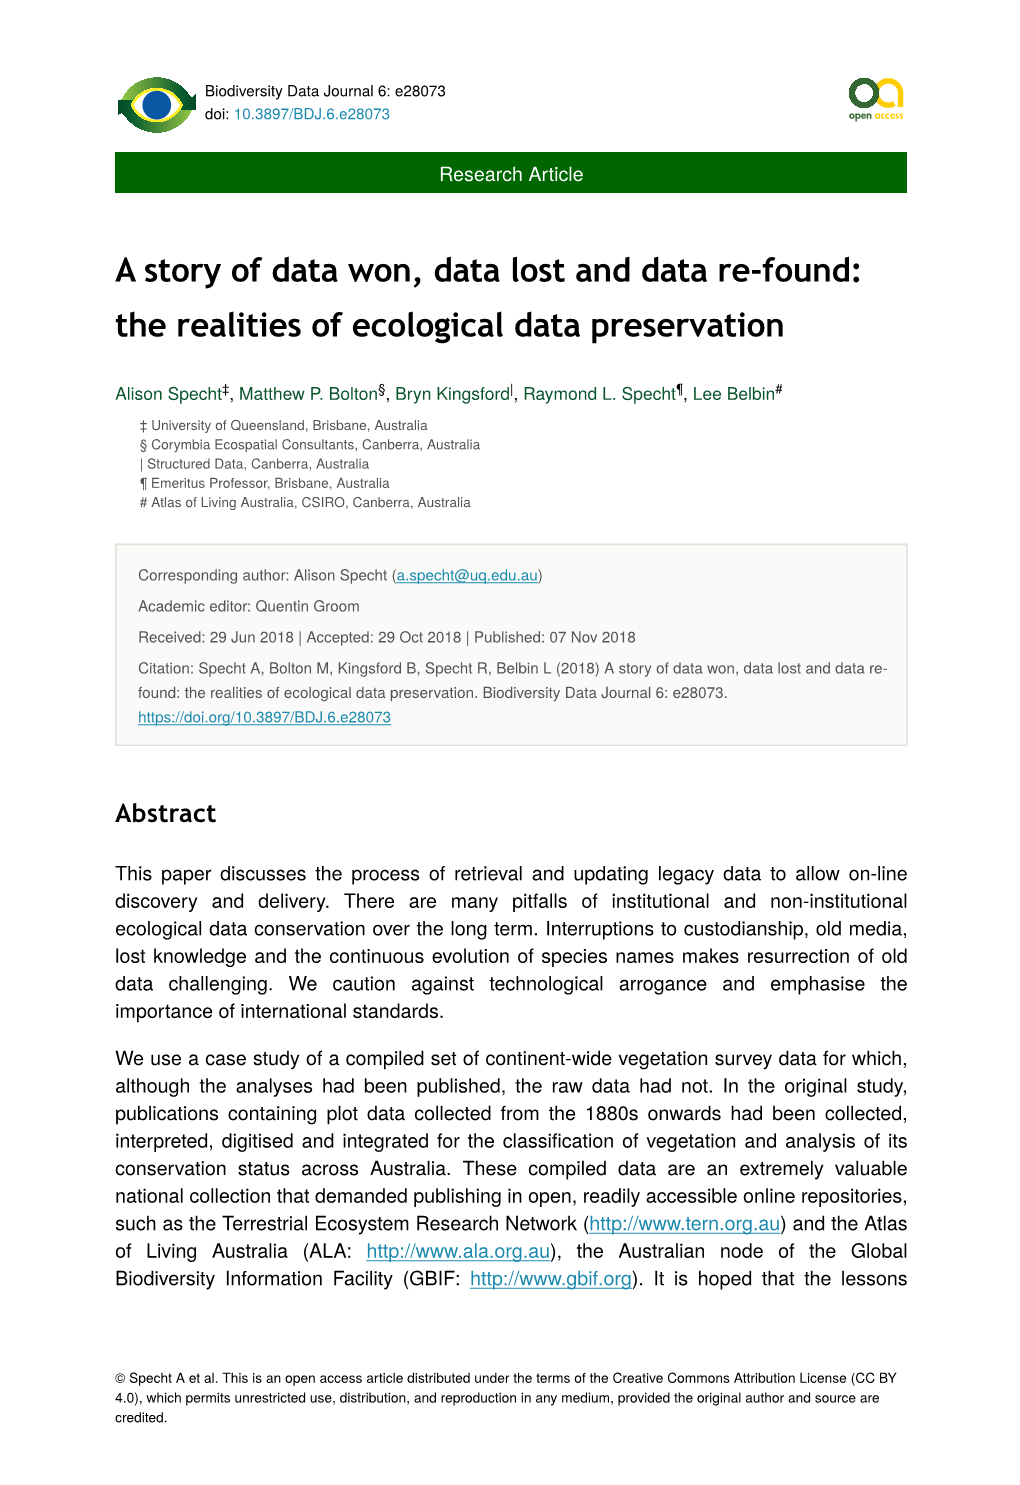 A Story of Data Won, Data Lost and Data Re-Found: the Realities of Ecological Data Preservation